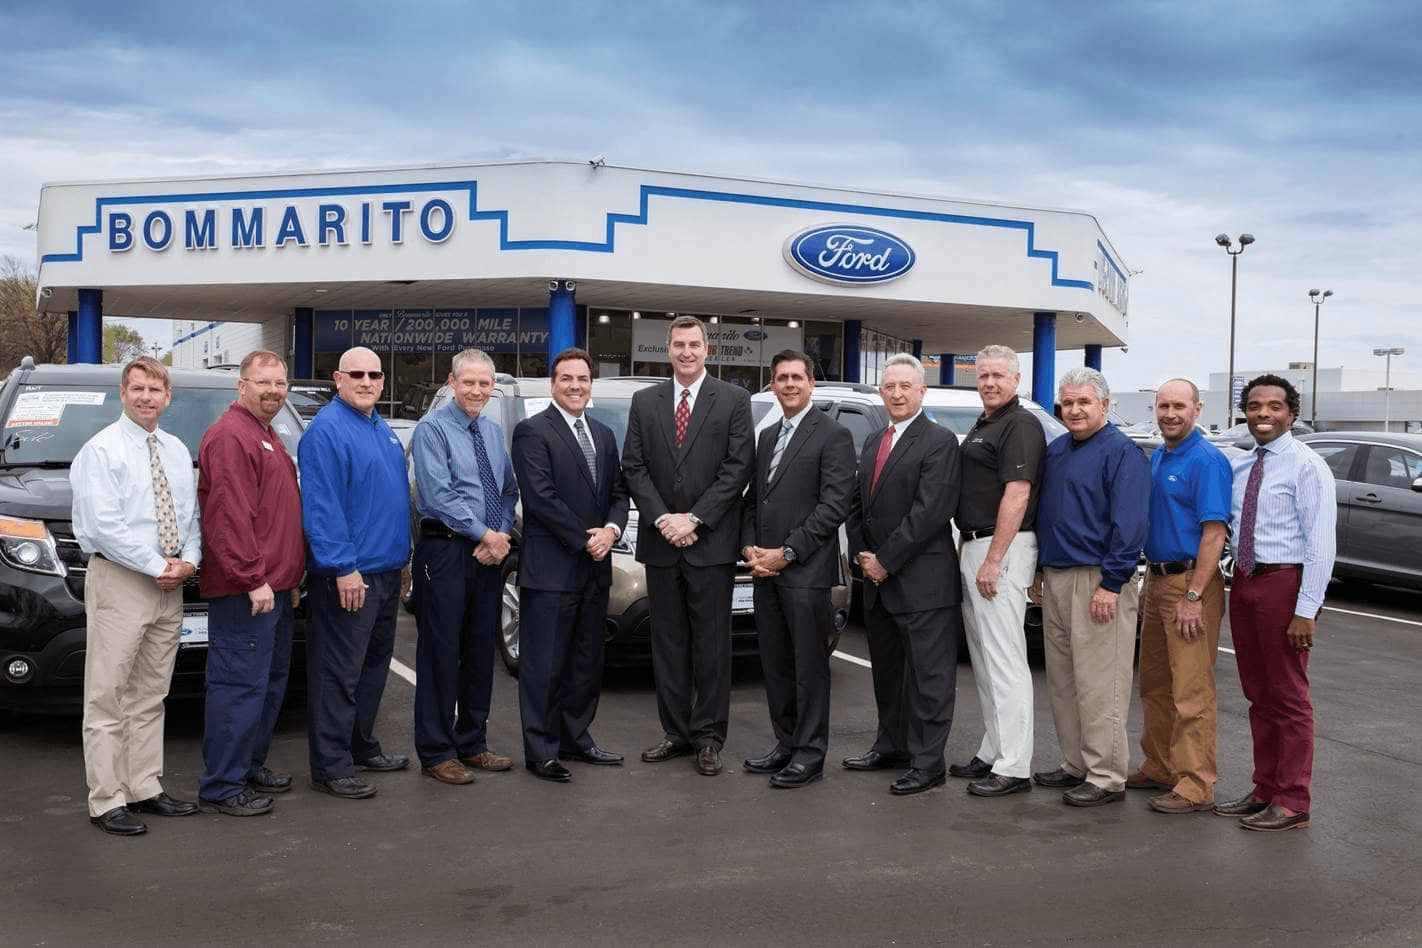 BOMMARITO FORD SUPERSTORE IN ST. LOUIS EARNS PRESTIGIOUS PRESIDENT'S AWARD FROM FORD MOTOR COMPANY.